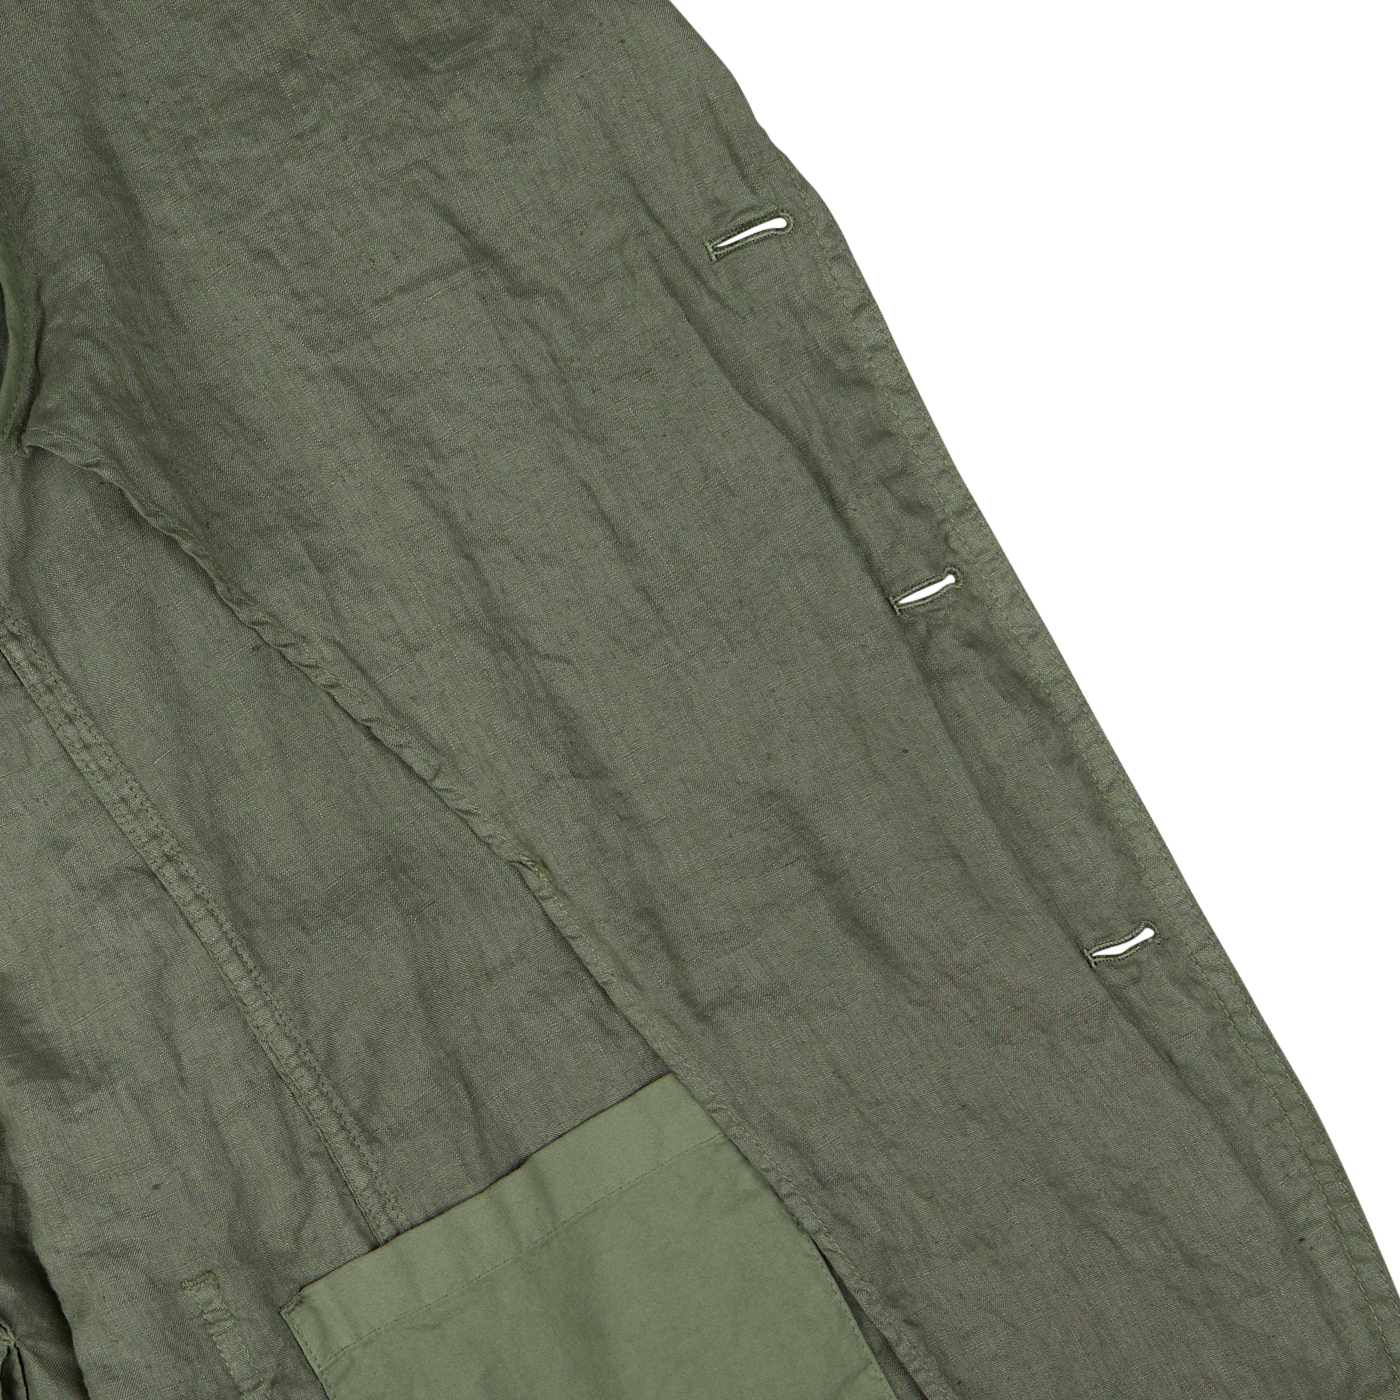 Moss Green Washed Linen Samuraki jacket with a detailed view of the buttonholes and stitching by Aspesi.